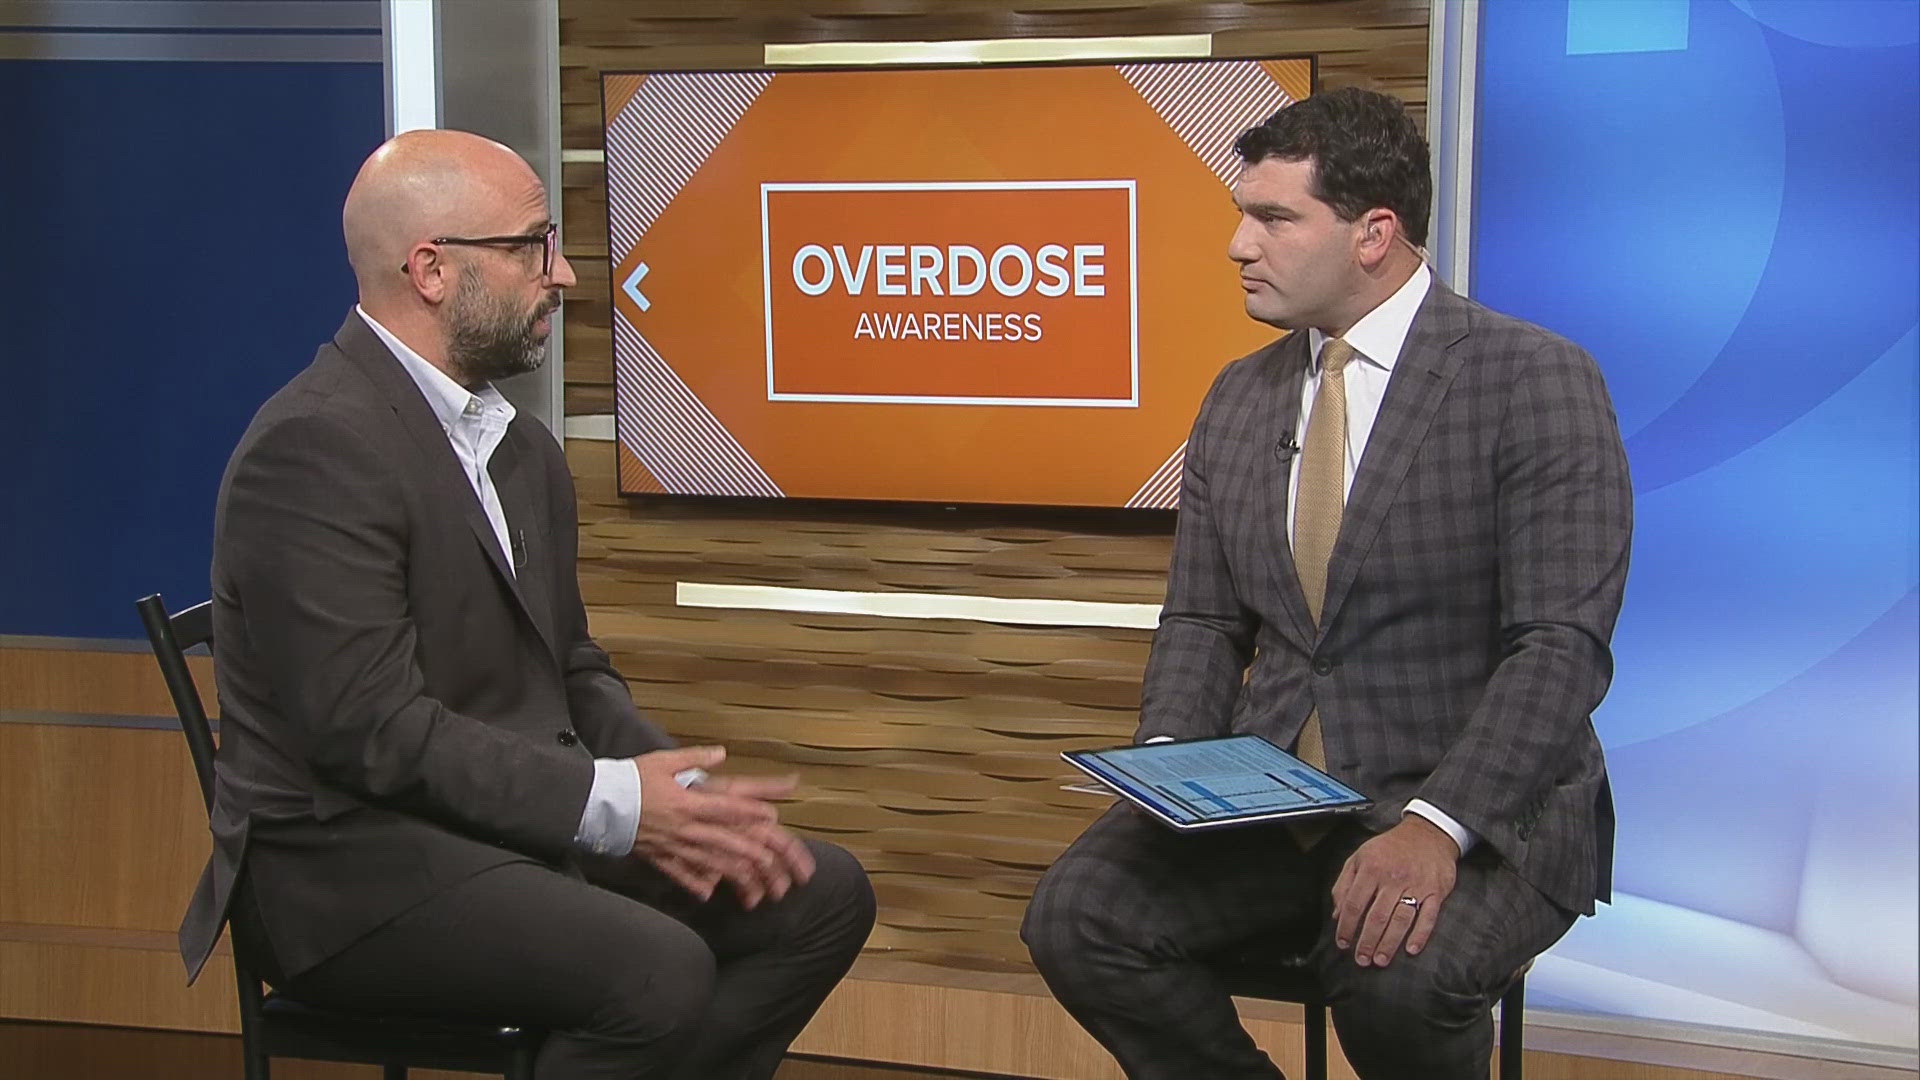 Maryhaven's Boomer Schmidt discusses an event the organization is holding for people to share overdose survival stories.